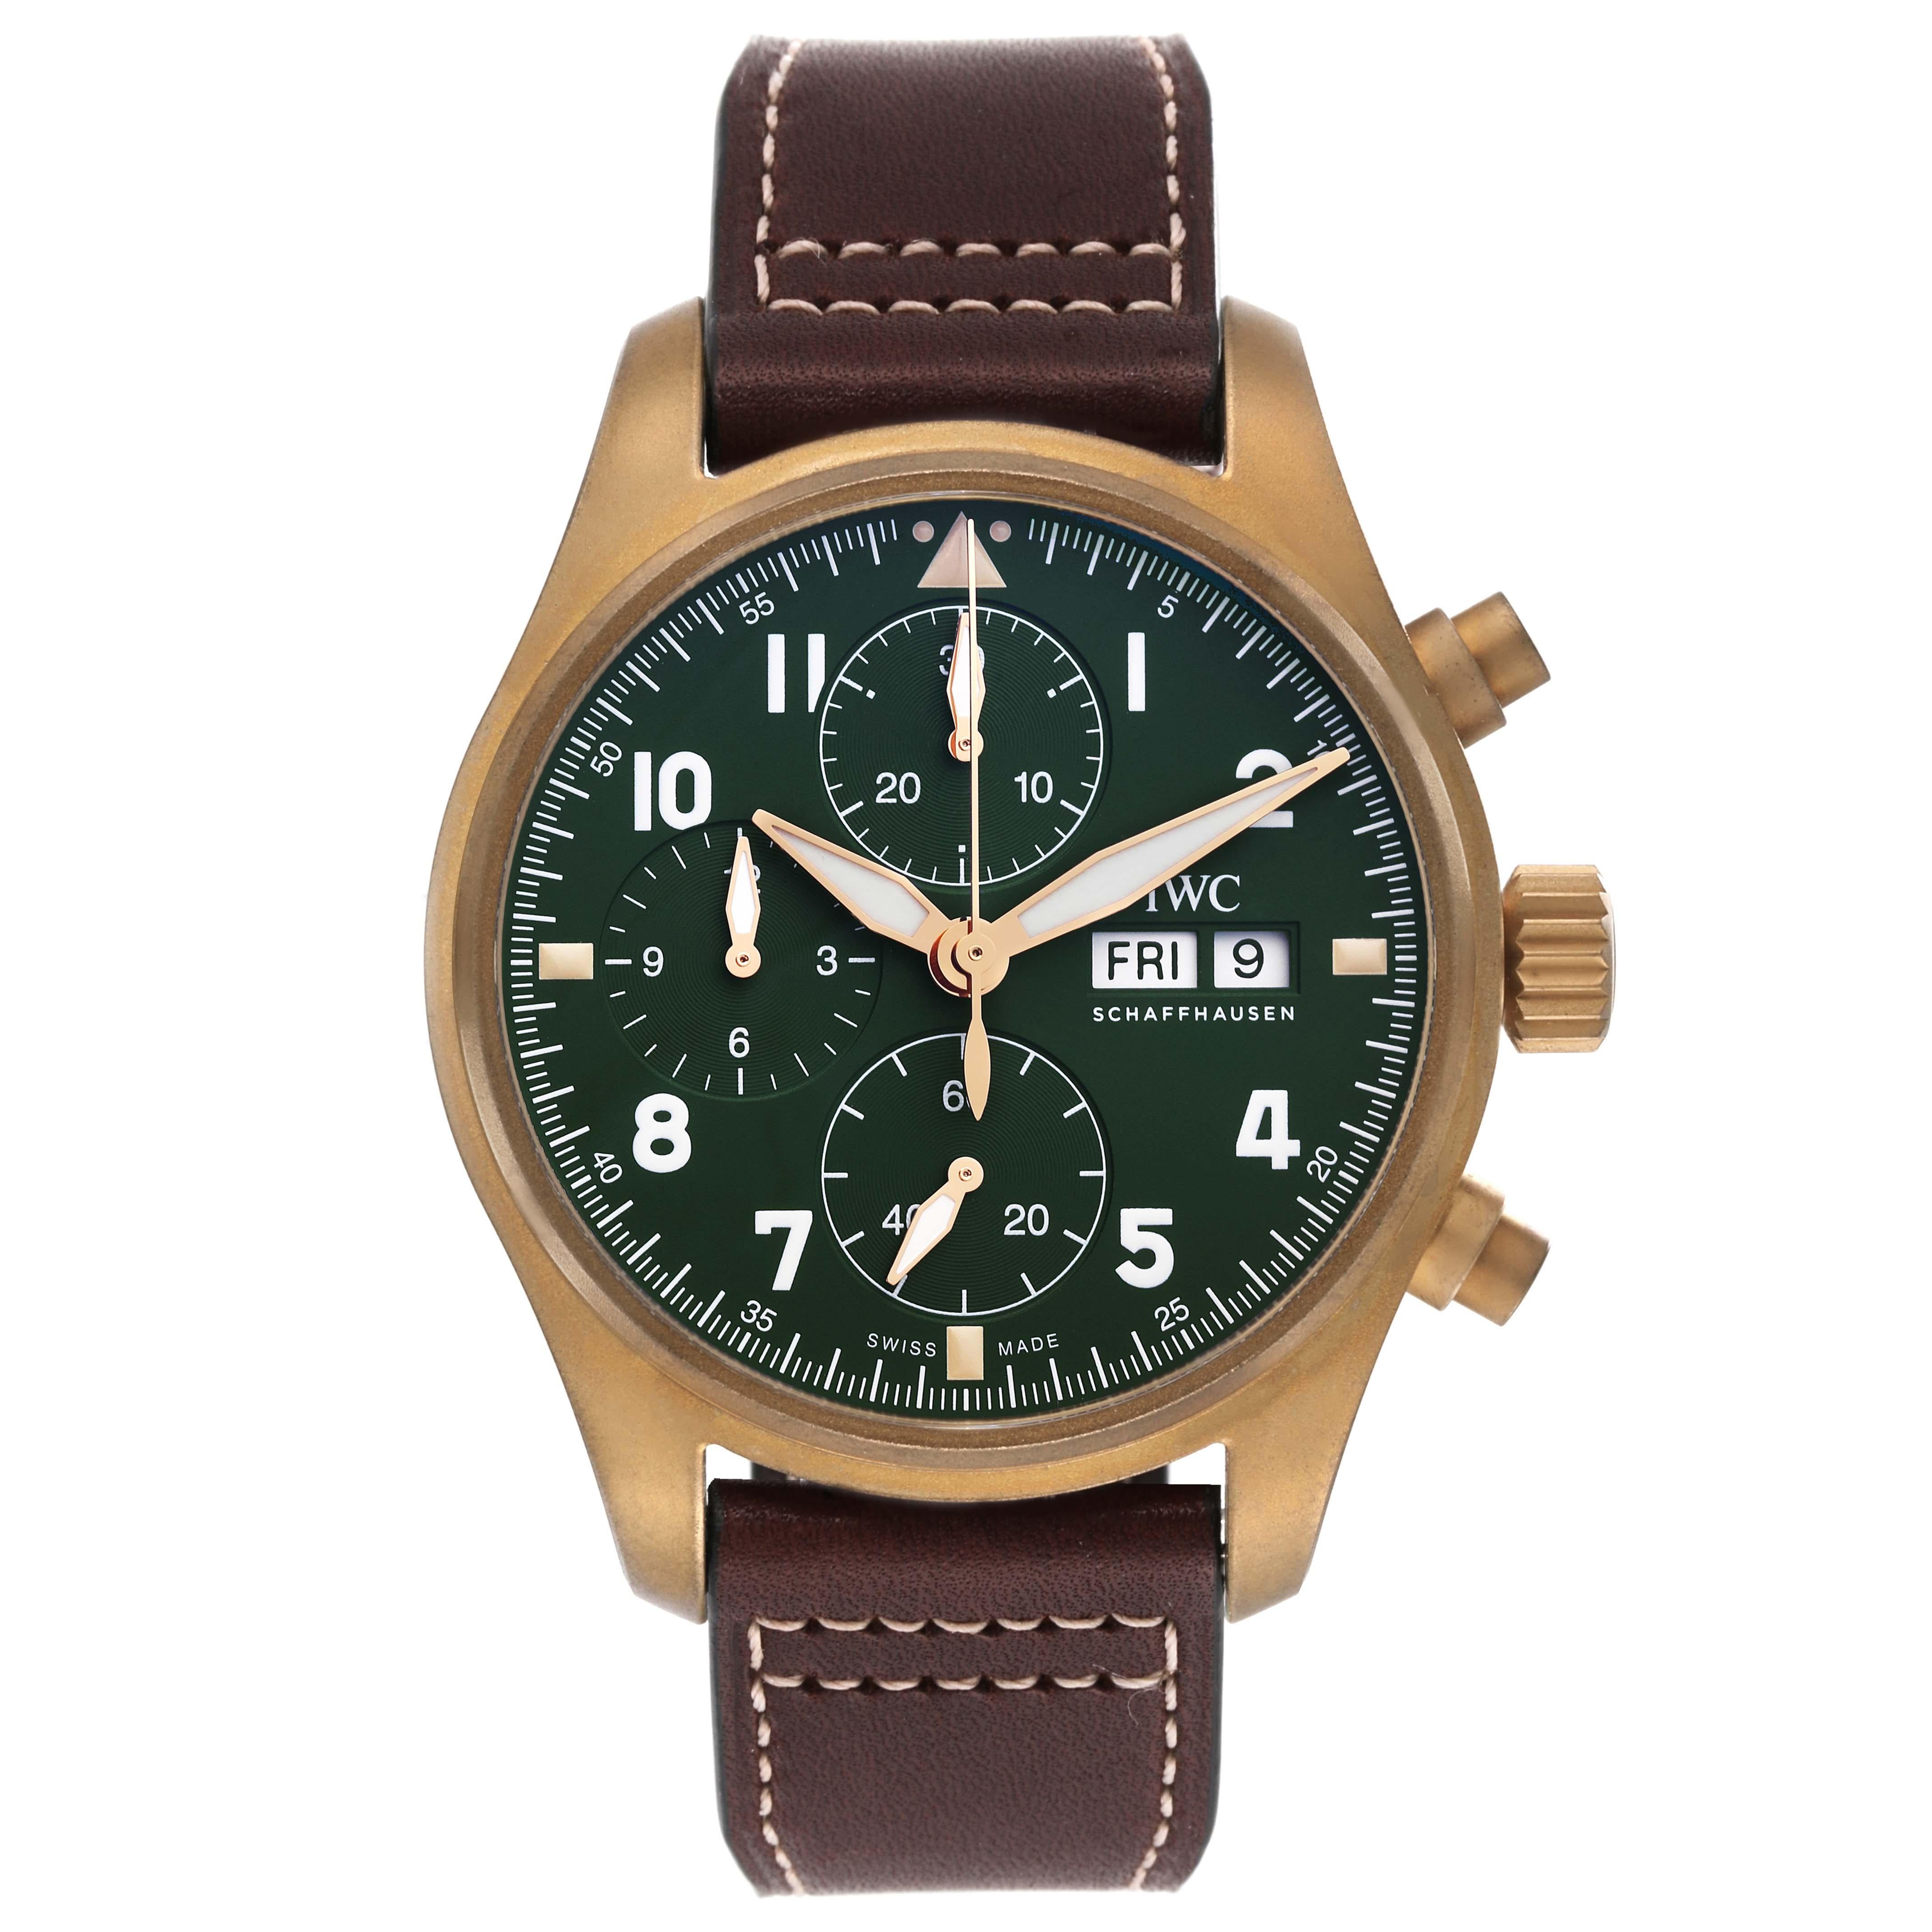 IWC Pilot Chronograph Spitfire Bronze Mens Watch IW387902 Unworn. Automatic self-winding chronograph movement. Bronze case 41.0 mm in diameter. Soft-iron inner case for protection against magnetic fields. Bronze Bezel. Scratch resistant sapphire